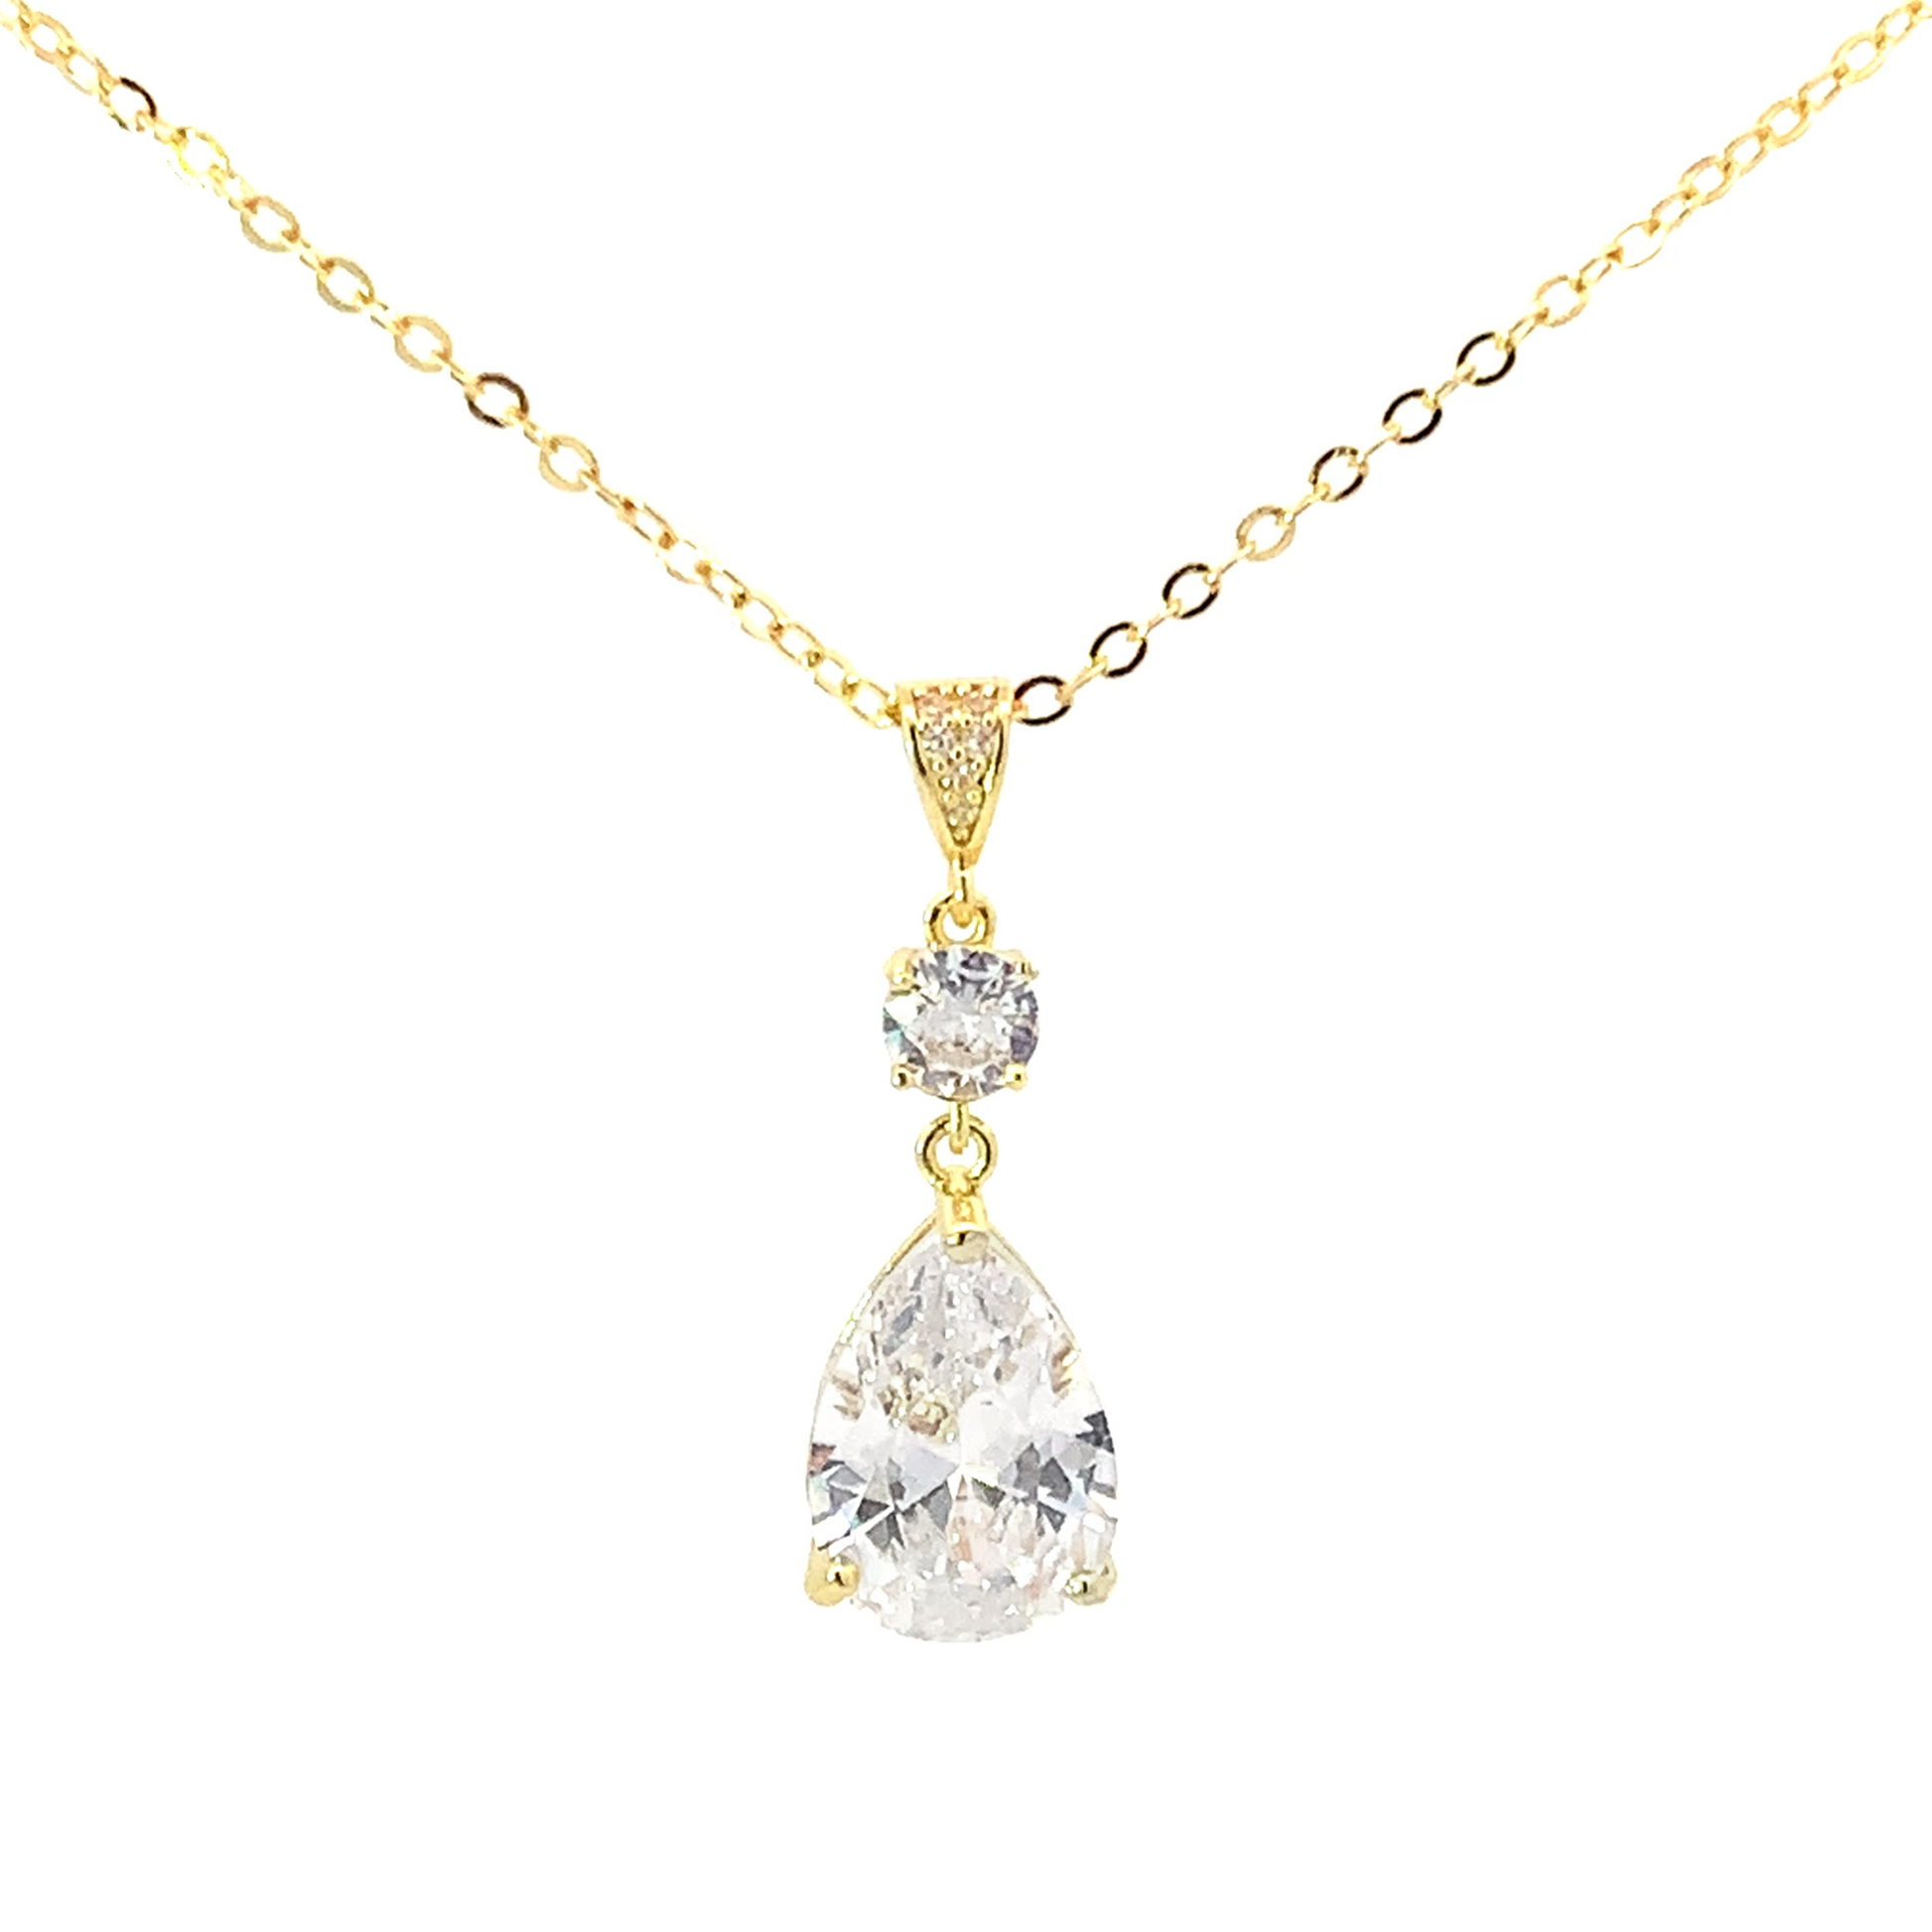 Crystal pear bridal pendant necklace gold